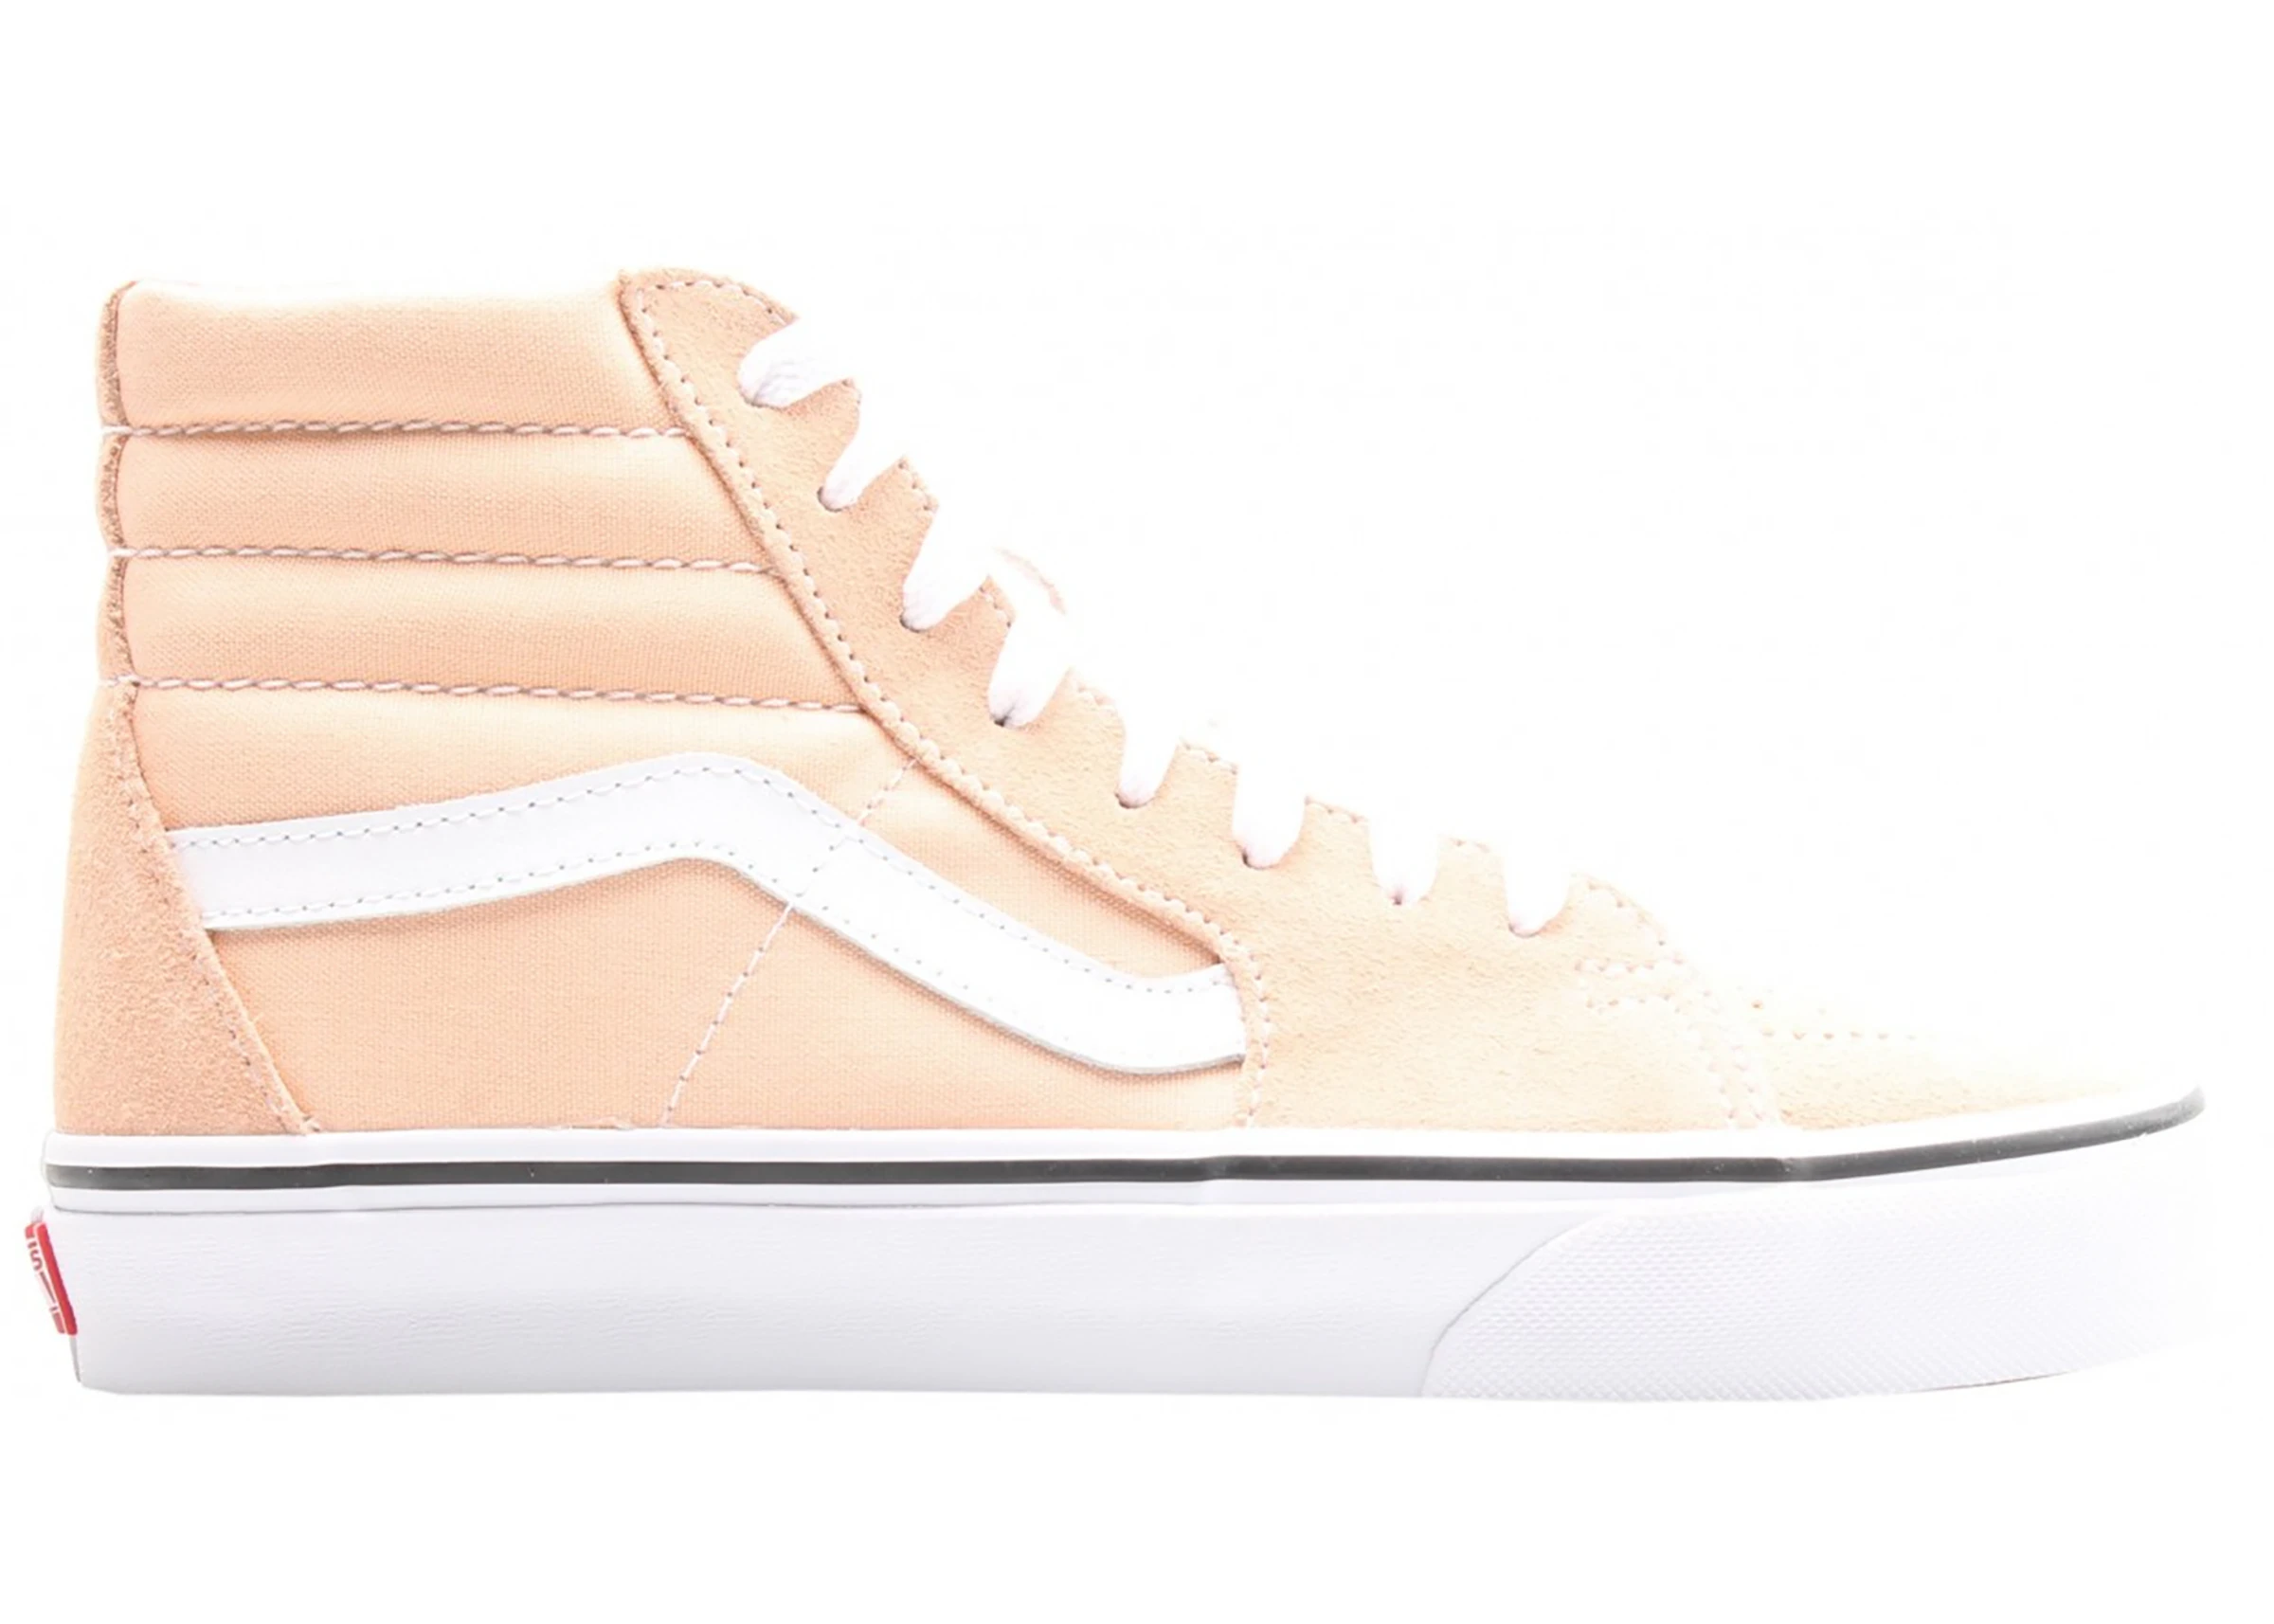 semiconductor Trunk library sensitivity Vans Sk8-Hi Classic Bleached Apricot - VN0A38GEU5Y - US